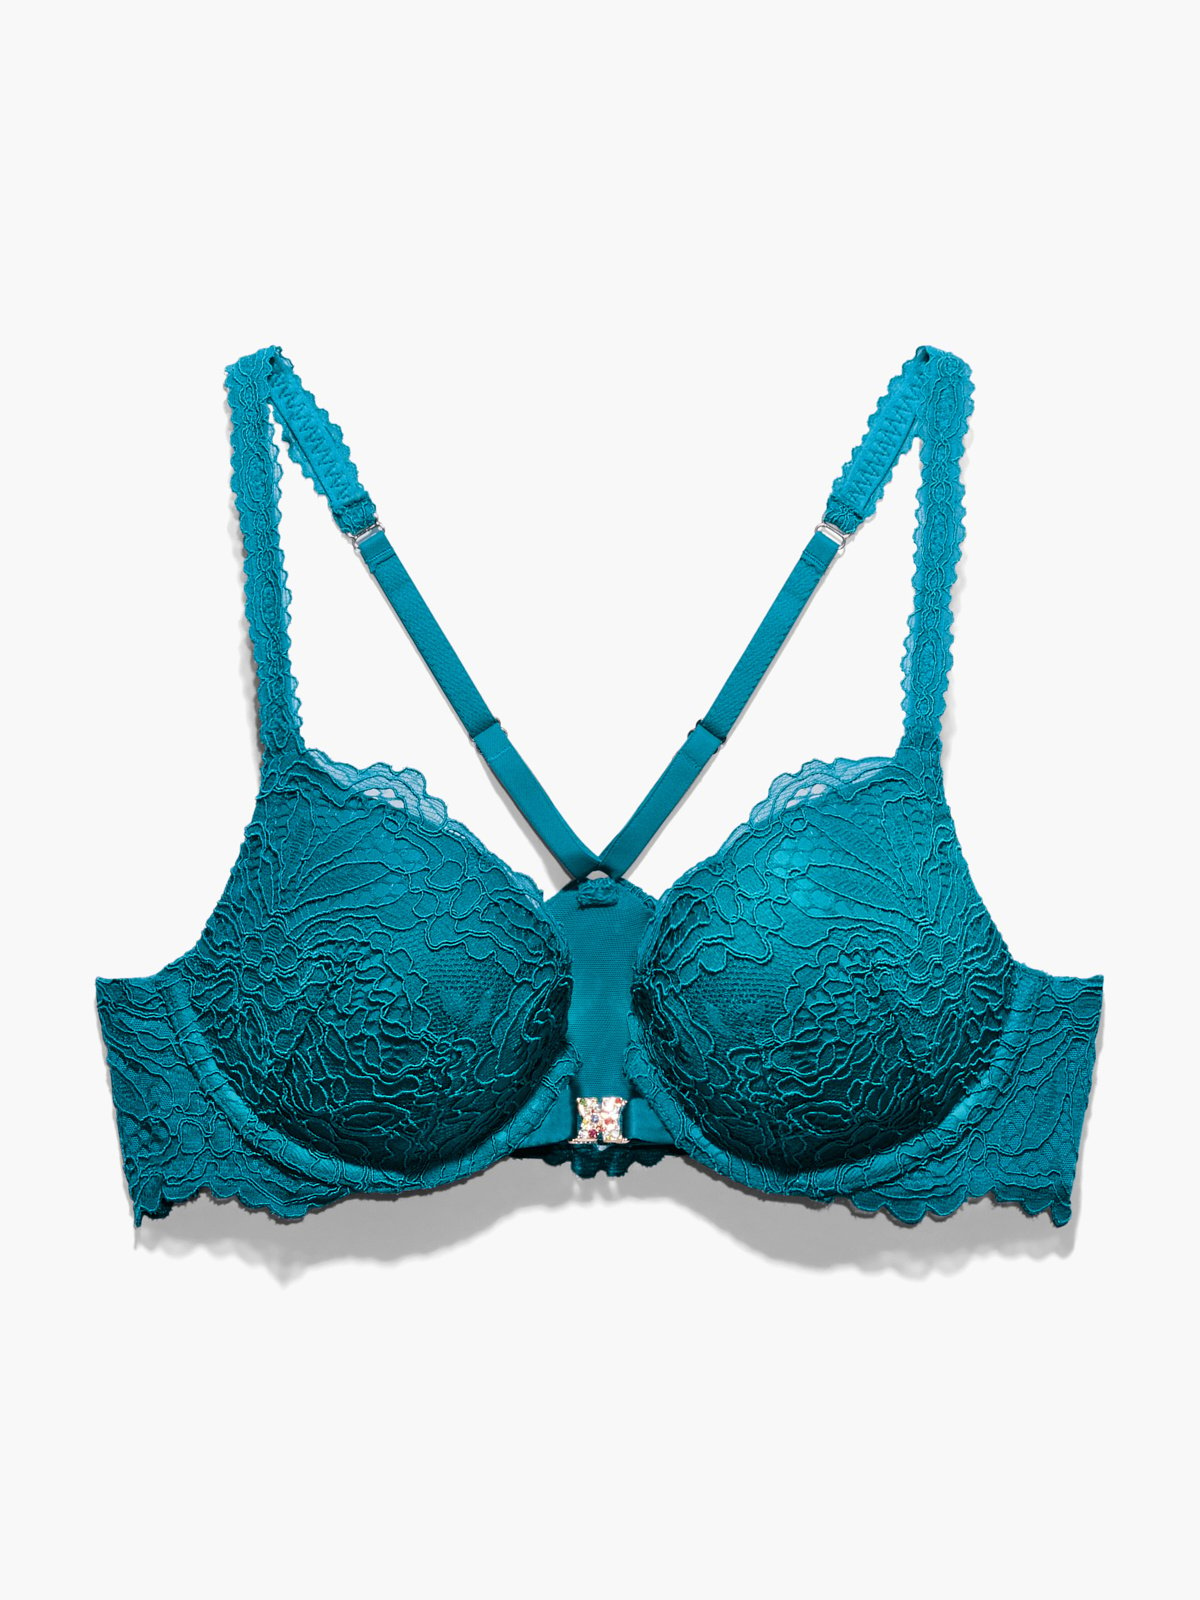 Romantic Corded Lace Front-Closure Push-Up Bra in Blue | SAVAGE X FENTY